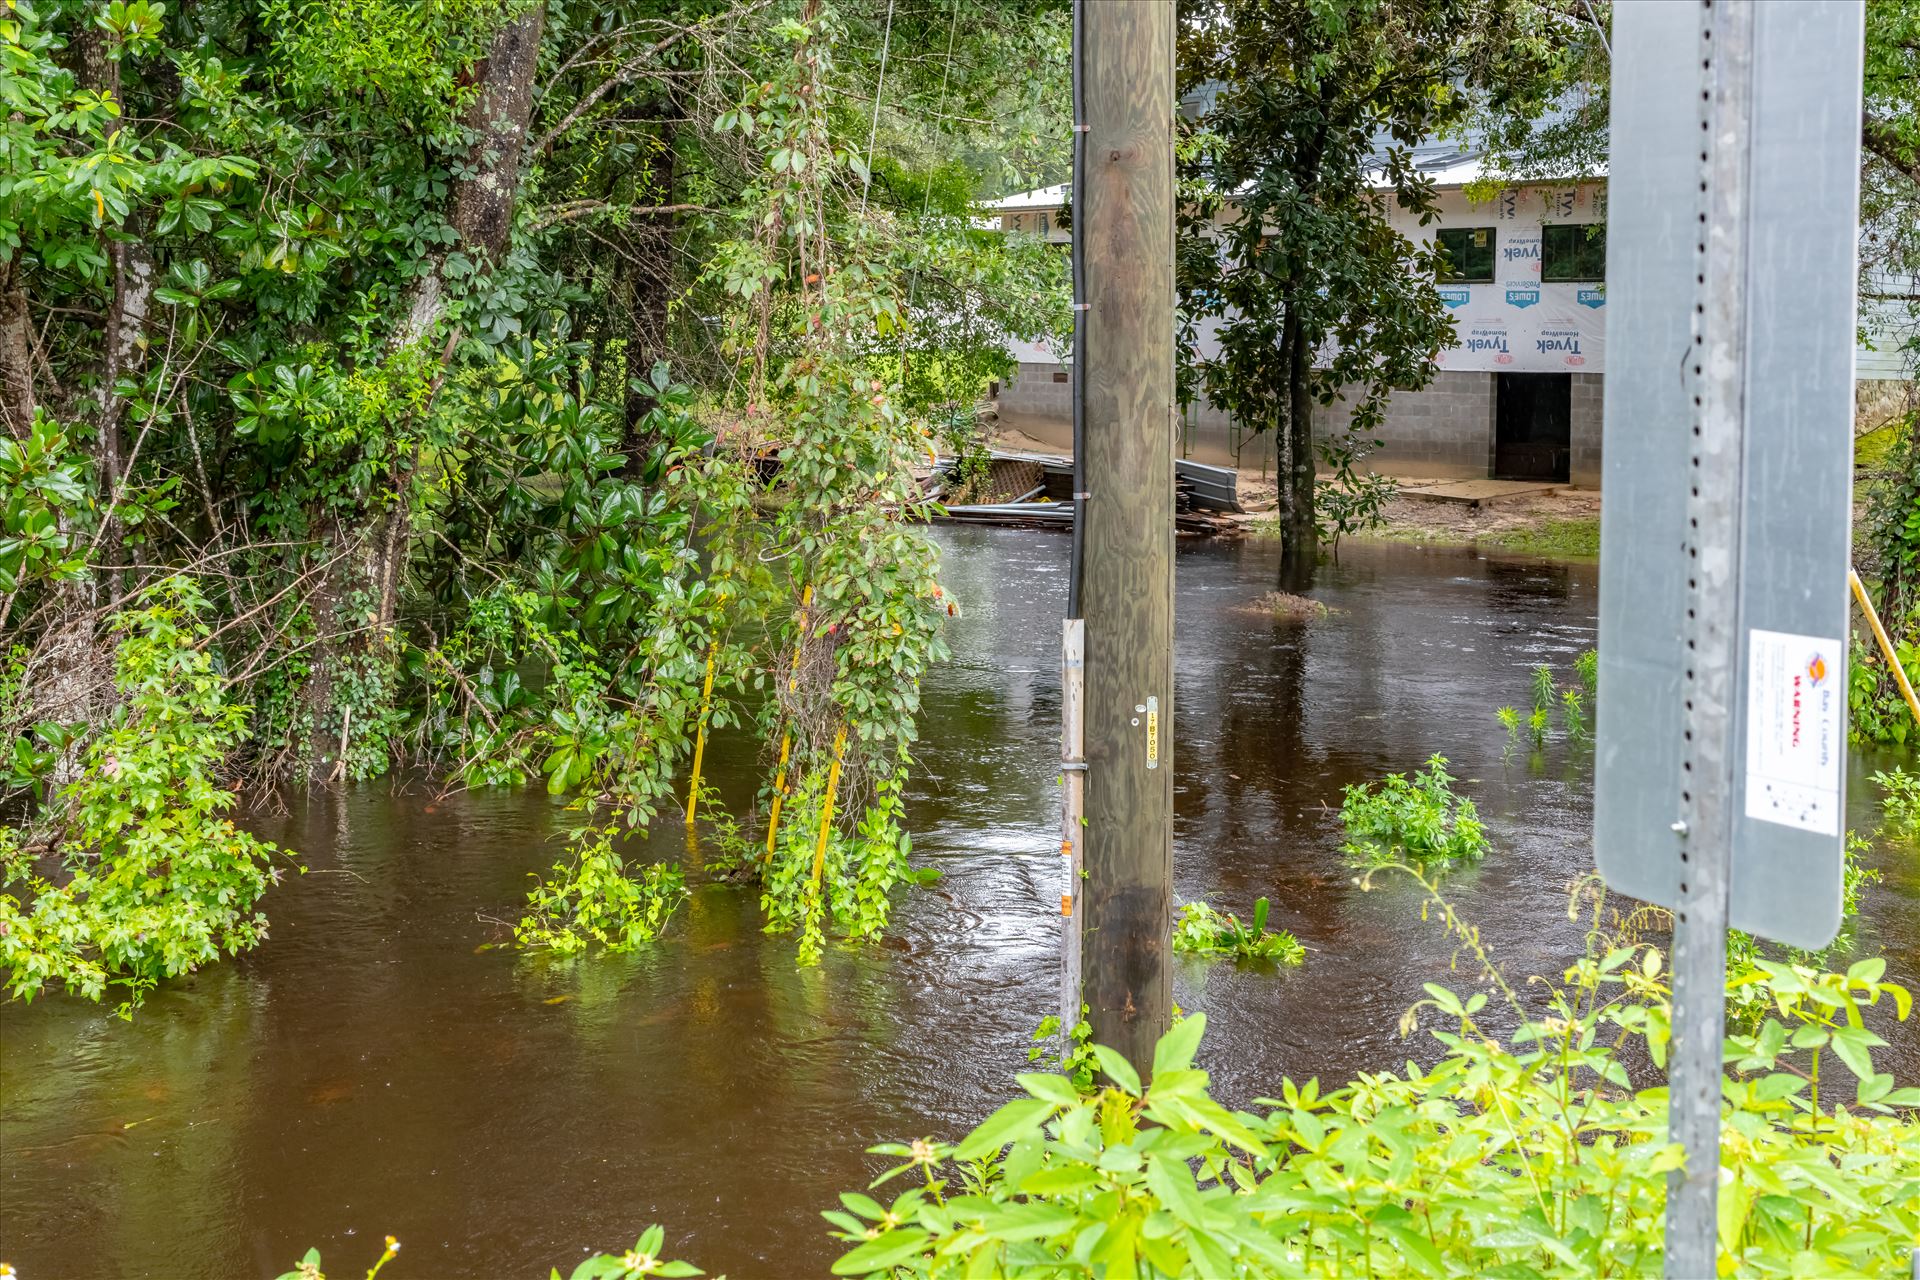 bear creek out of bank 3 August 02, 2018.jpg - August 02, 2018 heavy rains flooded many parts of Bay County, Florida. This photo is in the Bear Creek area. by Terry Kelly Photography